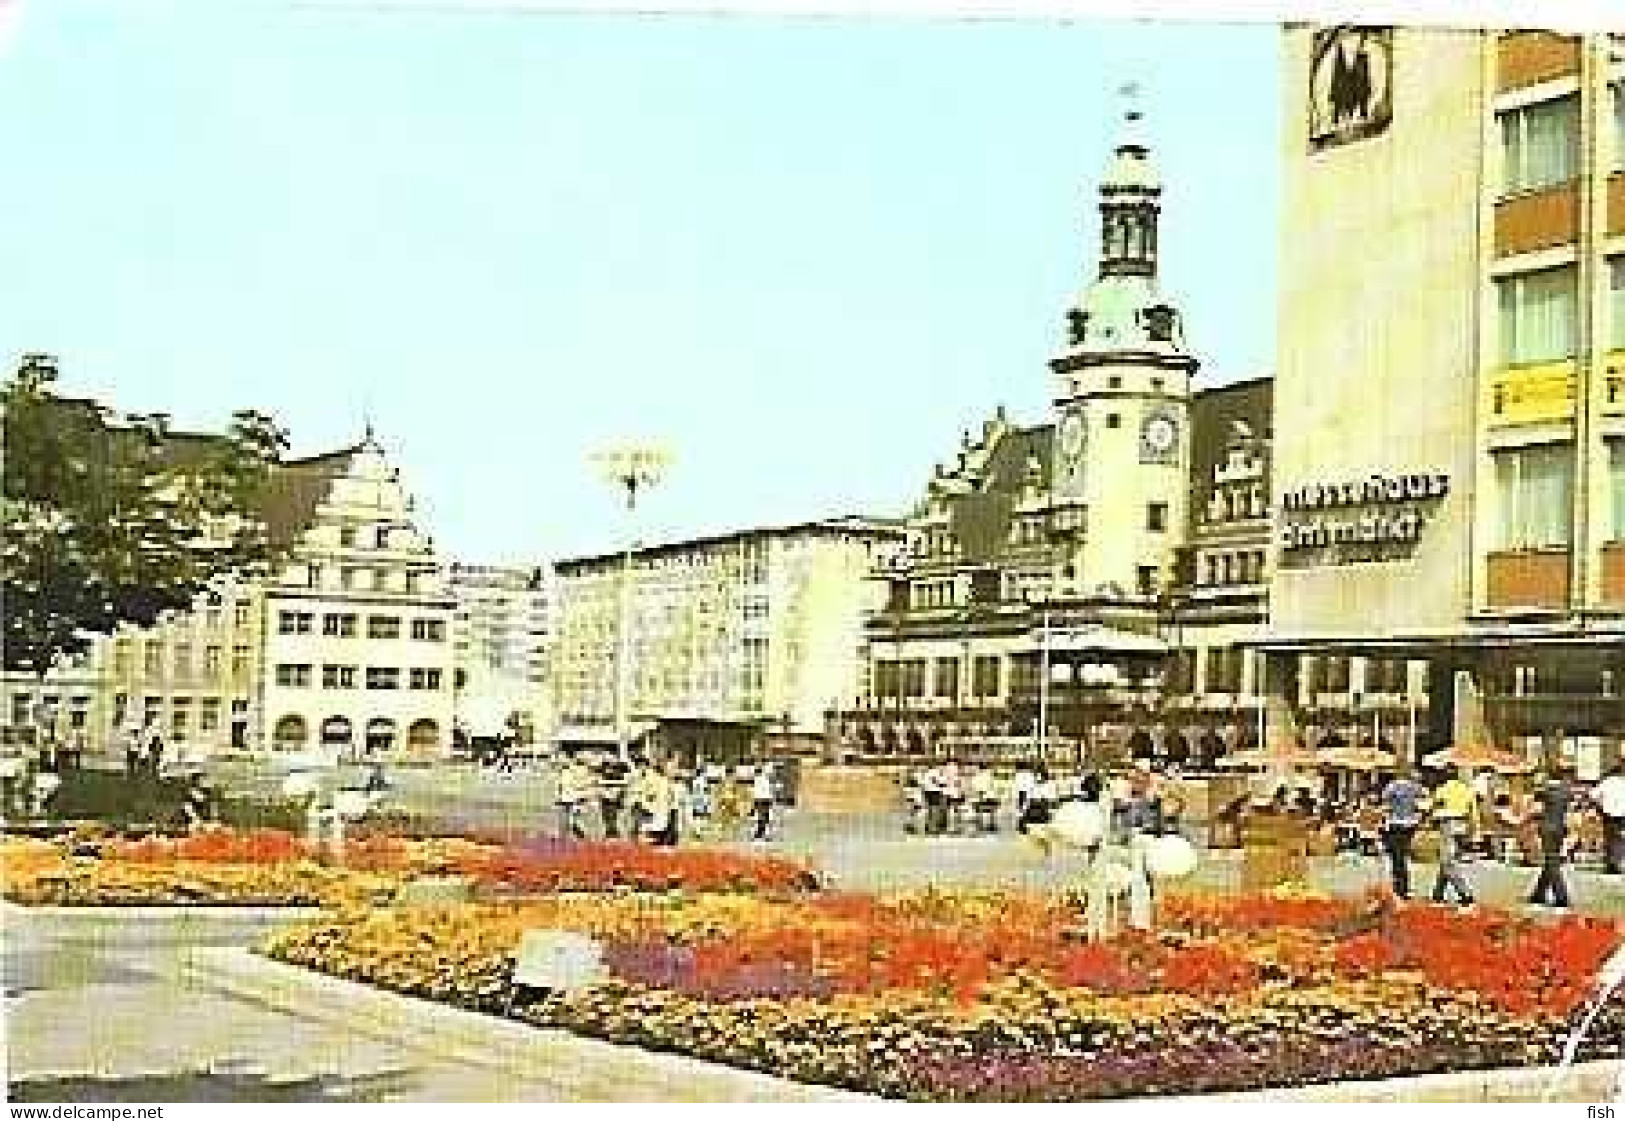 Germany  & Messesstadt Leipzig , Altes Rathaus Am Markt, Karl Marx Stad DDR To  Oeiras Portugal 1983 (7776) - Covers & Documents